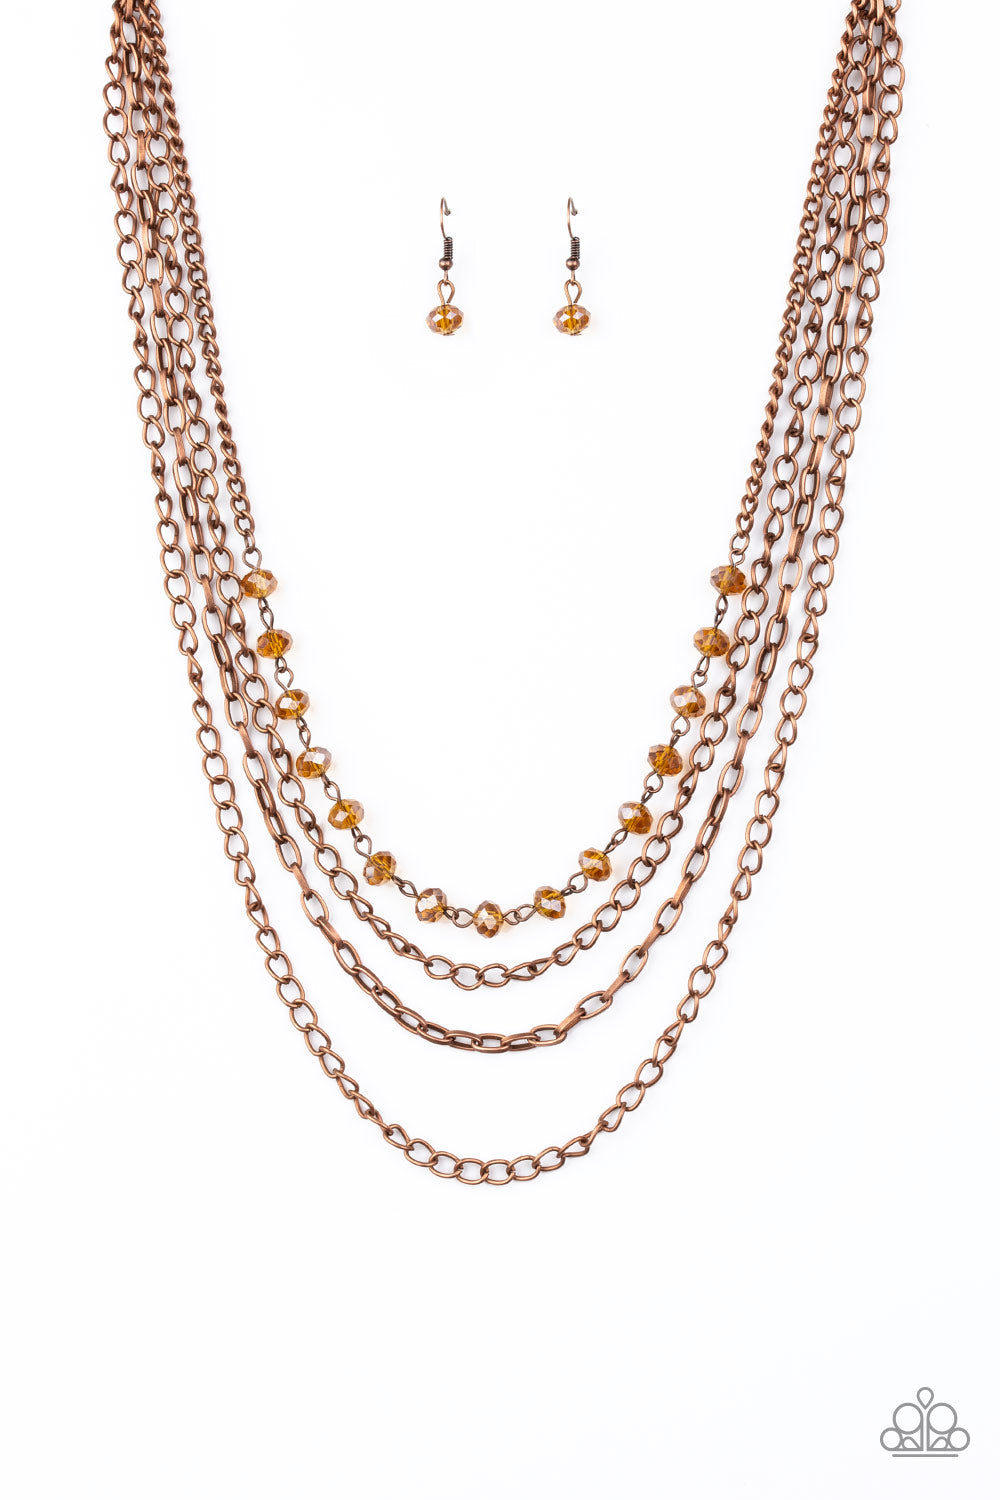 Extravagant Elegance Copper Necklace - Paparazzi Accessories  Mismatched copper chains layer down the chest. Dipped in a coppery metallic sheen, a strand of faceted black beads join below the collar for a glamorous look. Features an adjustable clasp closure.  Sold as one individual necklace. Includes one pair of matching earrings.